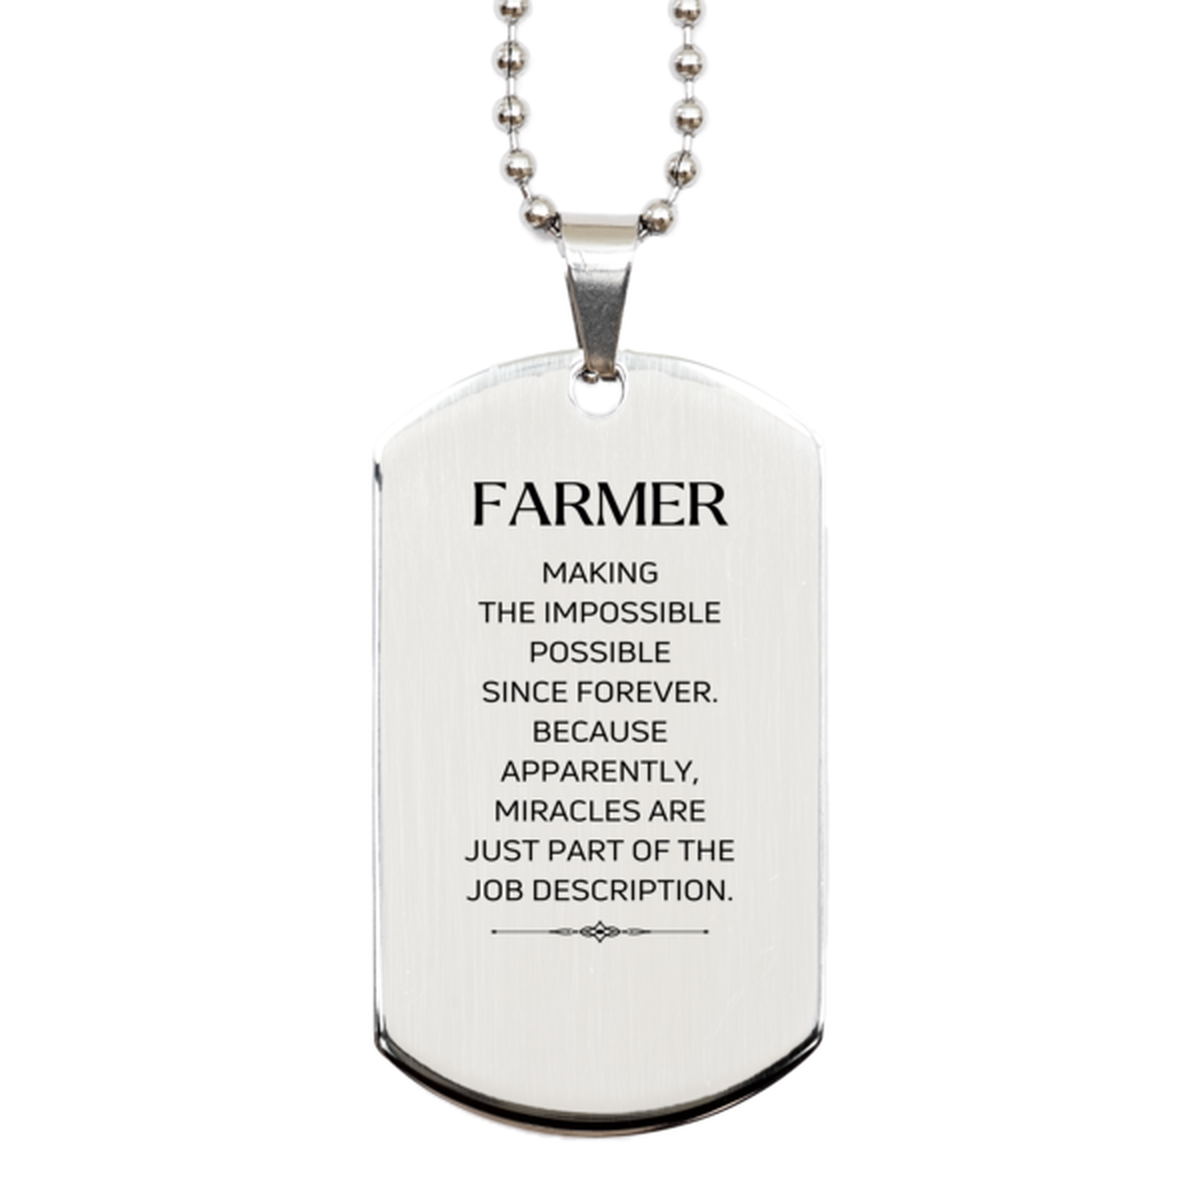 Funny Farmer Gifts, Miracles are just part of the job description, Inspirational Birthday Silver Dog Tag For Farmer, Men, Women, Coworkers, Friends, Boss